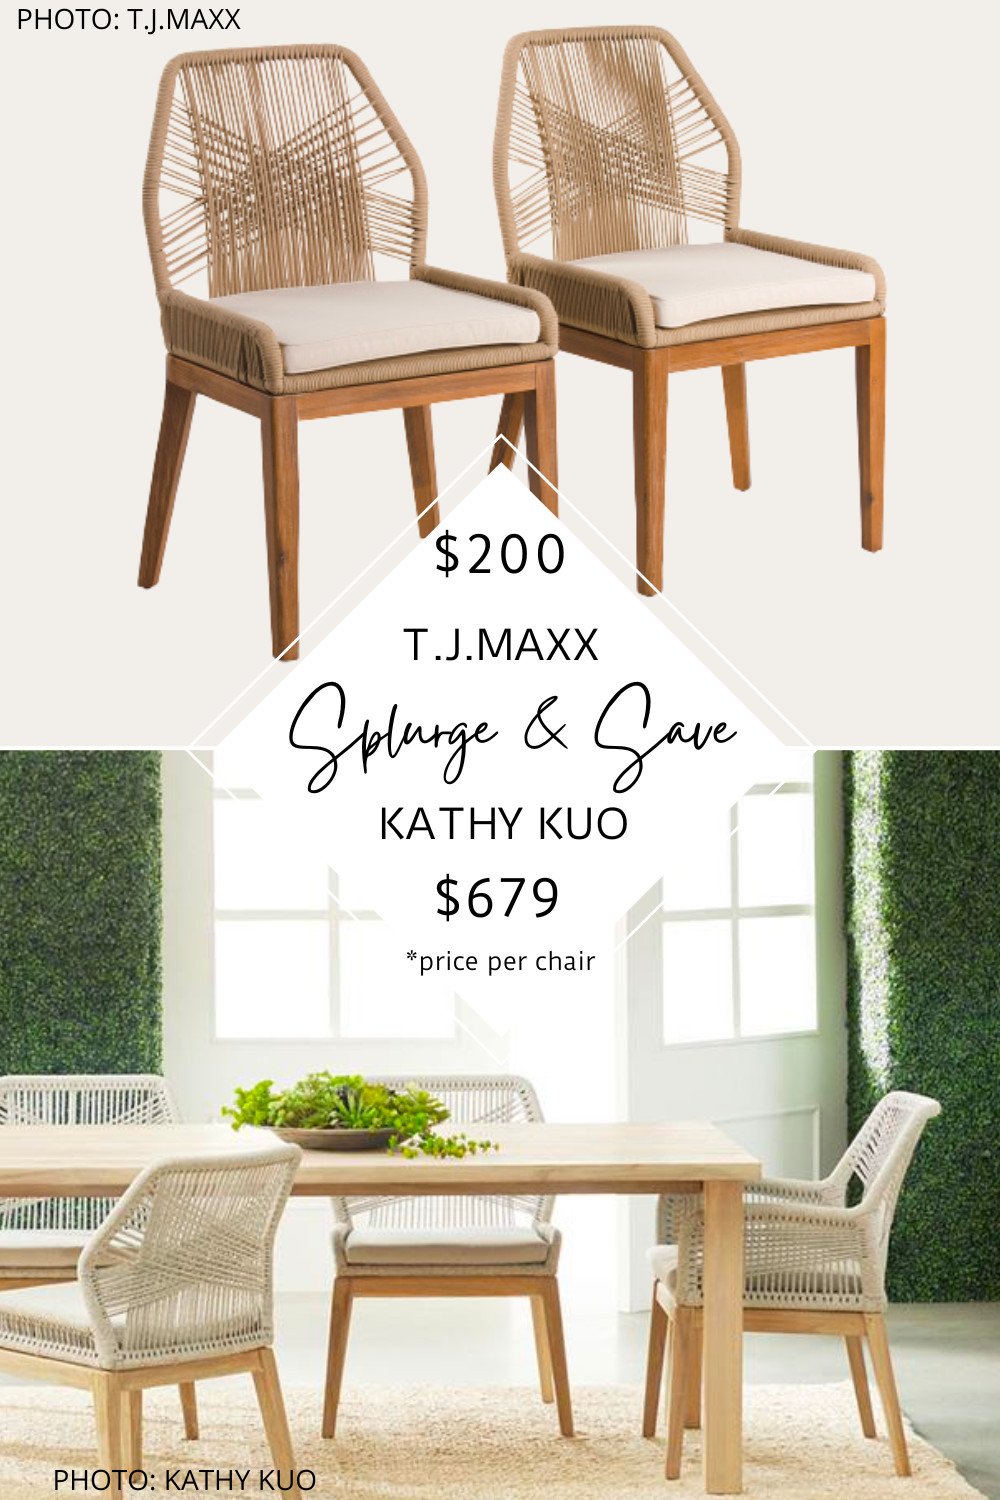 SPLURGE AND SAVE: KATHY KUO LORRY COASTAL WOVEN ROPE CHAIR AND STOOL DUPES  — KENDRA FOUND IT